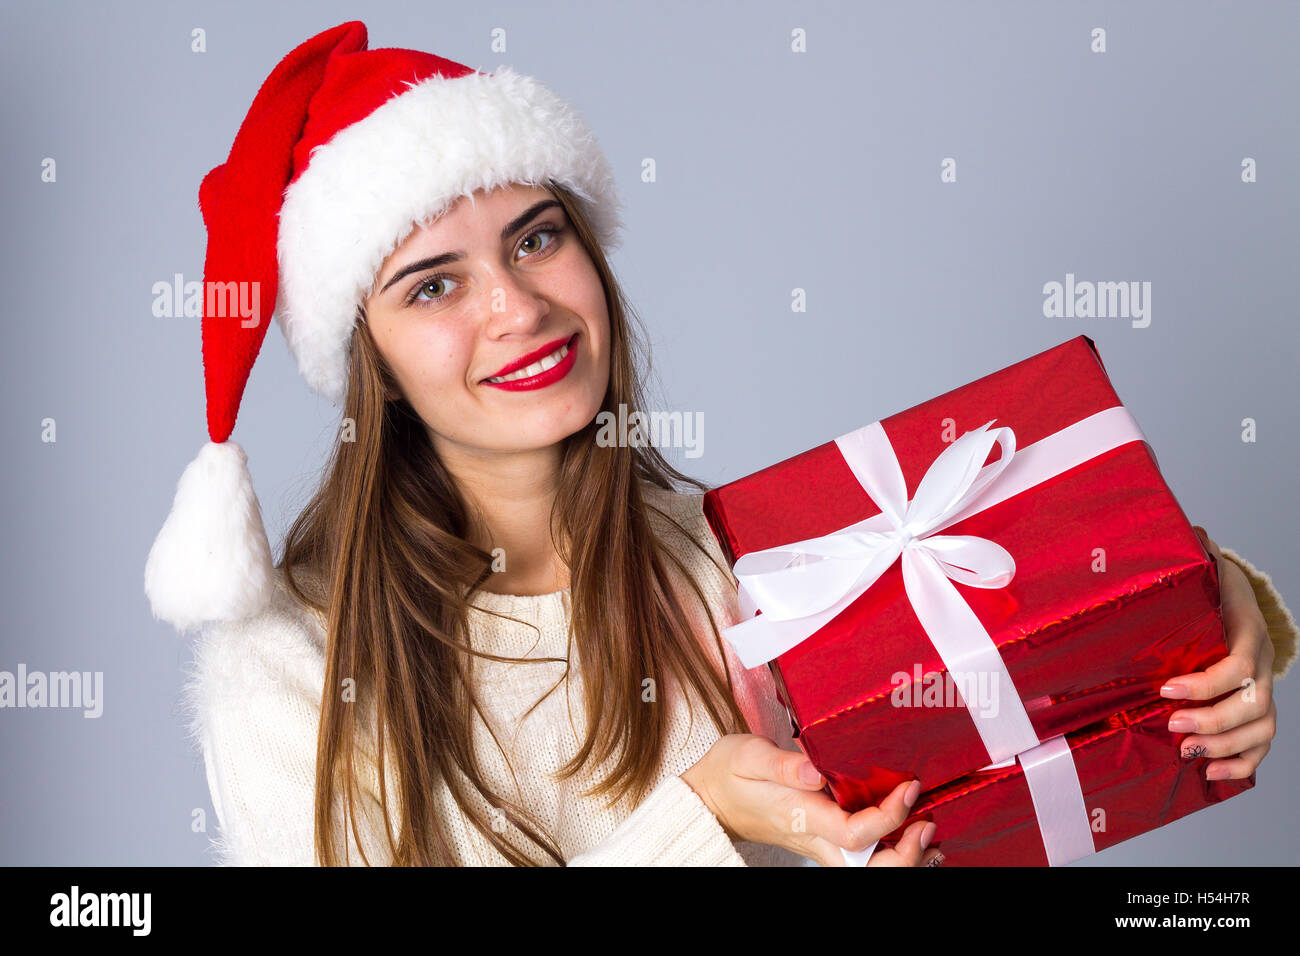 Woman in red christmas hat holding presents Stock Photo